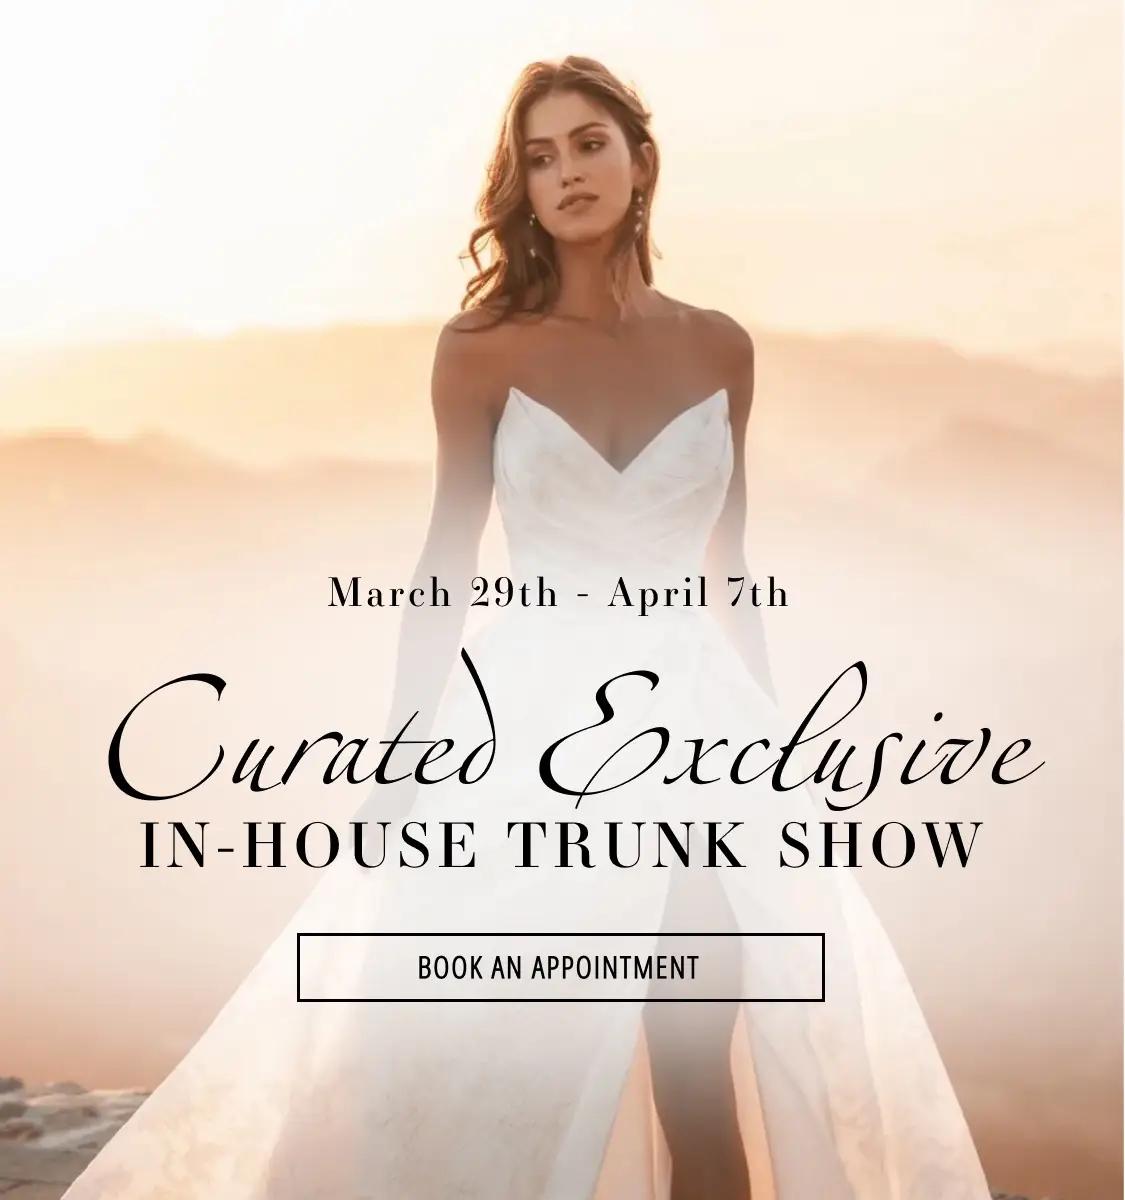 Curated Exclusive In-House Trunk Show Mobile Banner